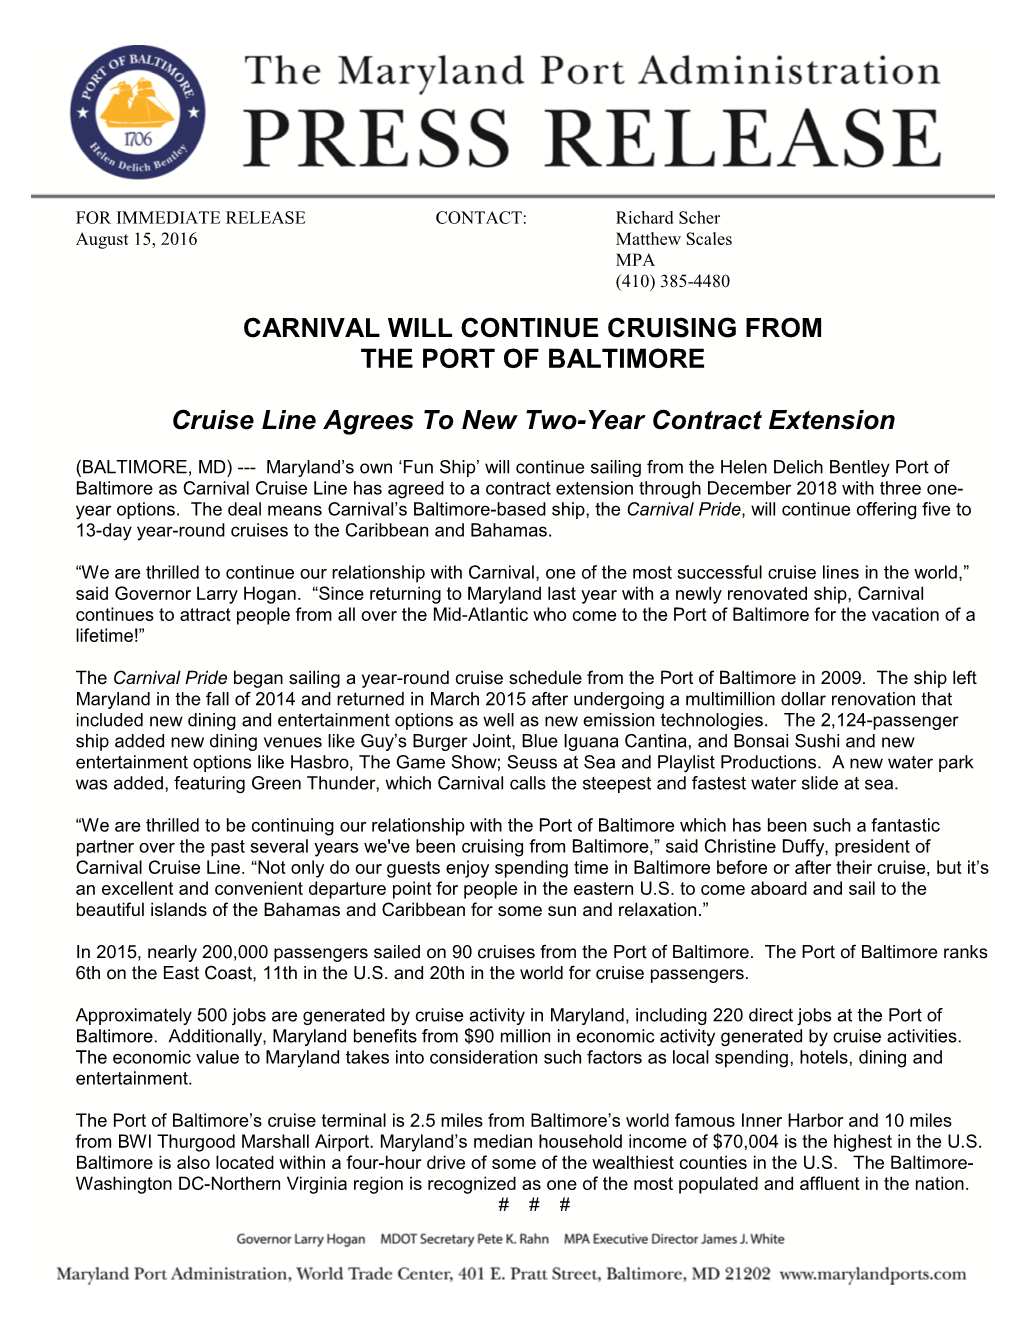 Carnival Will Continue Cruising from the Port of Baltimore